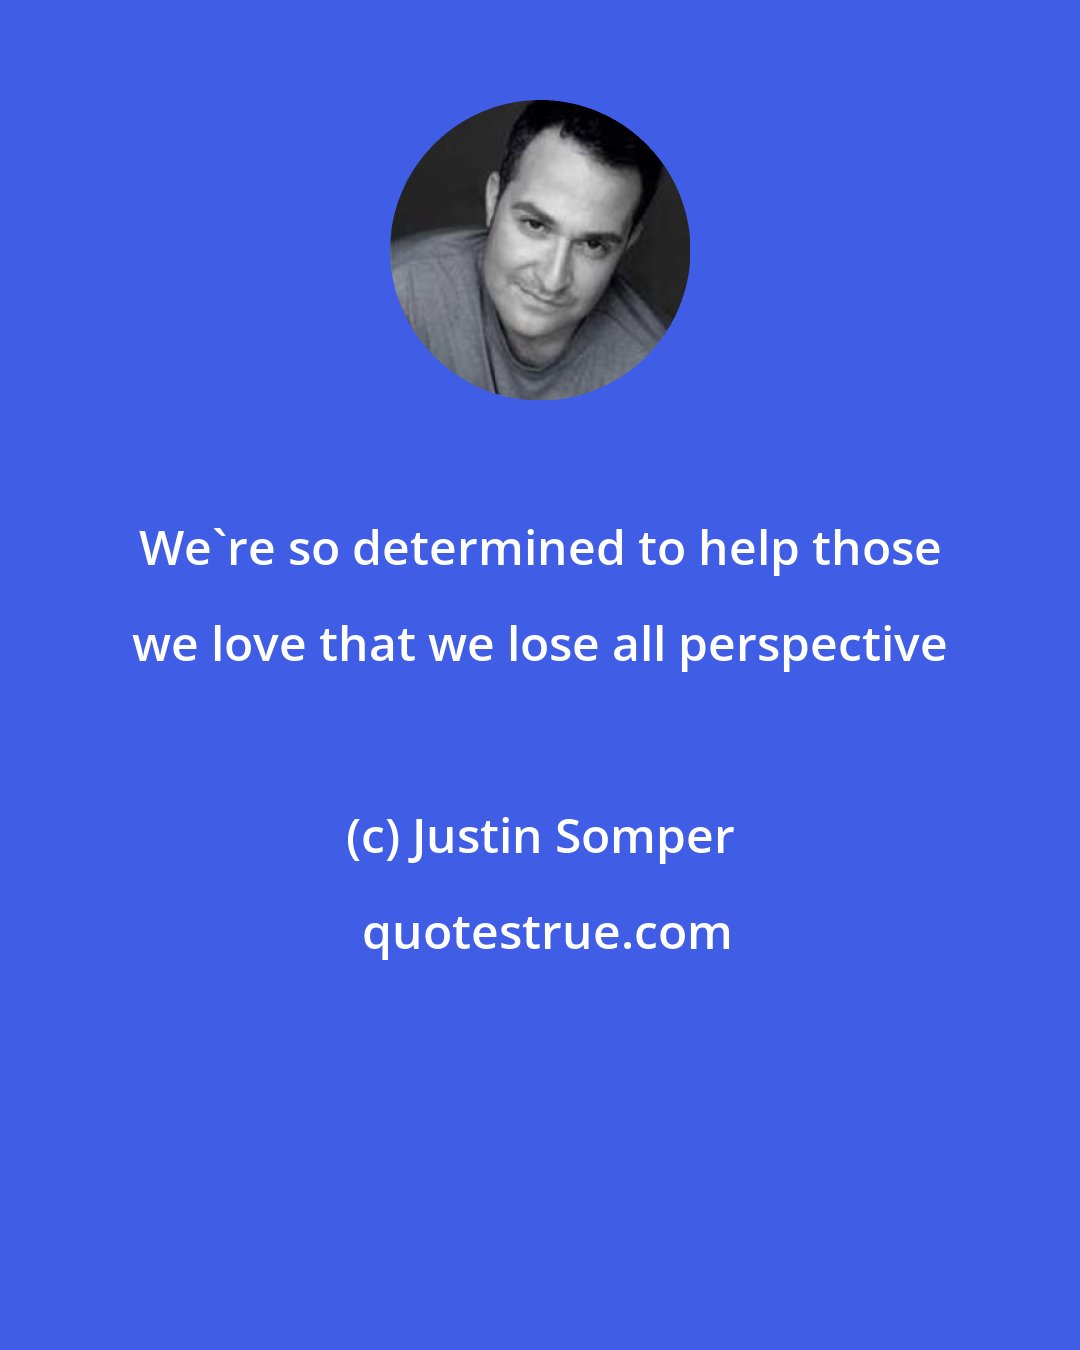 Justin Somper: We're so determined to help those we love that we lose all perspective